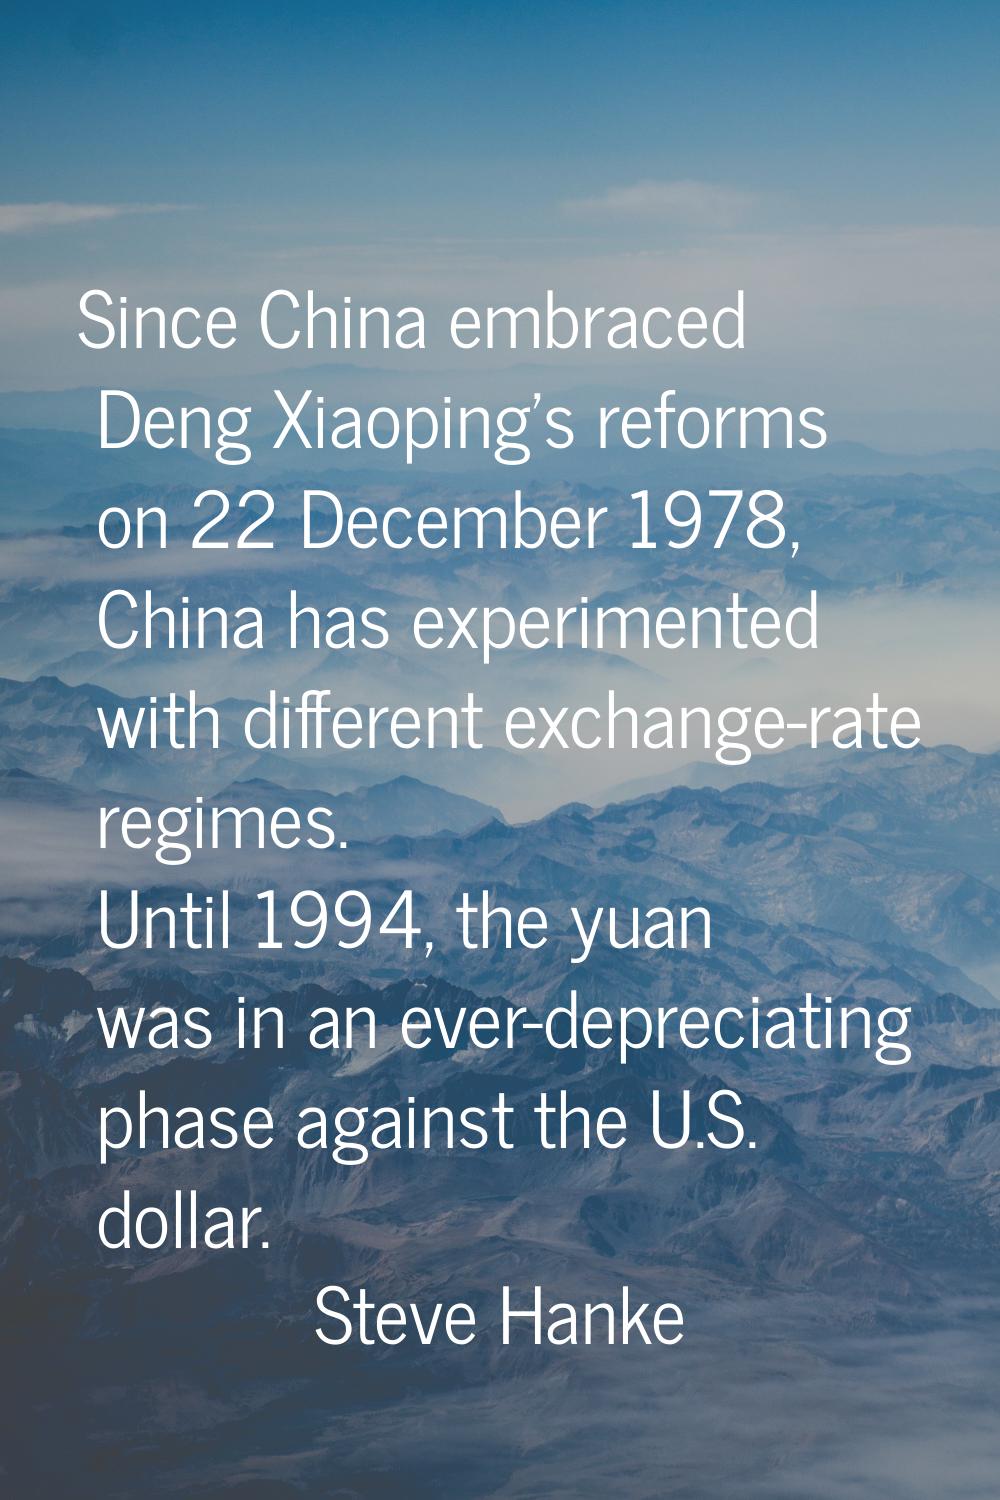 Since China embraced Deng Xiaoping's reforms on 22 December 1978, China has experimented with diffe